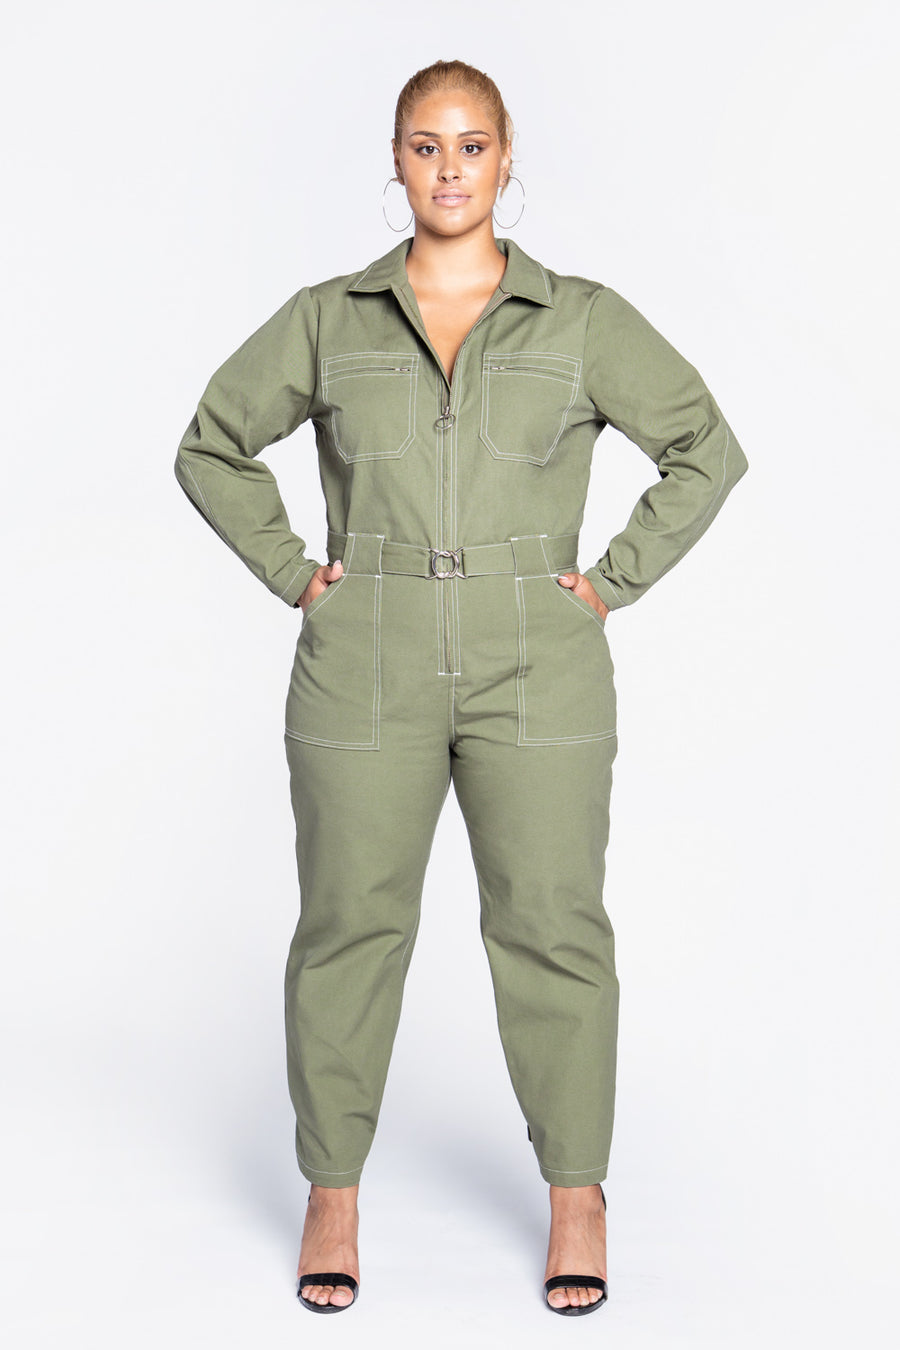 Make Your Own Boiler Suit With A Personal Twist.